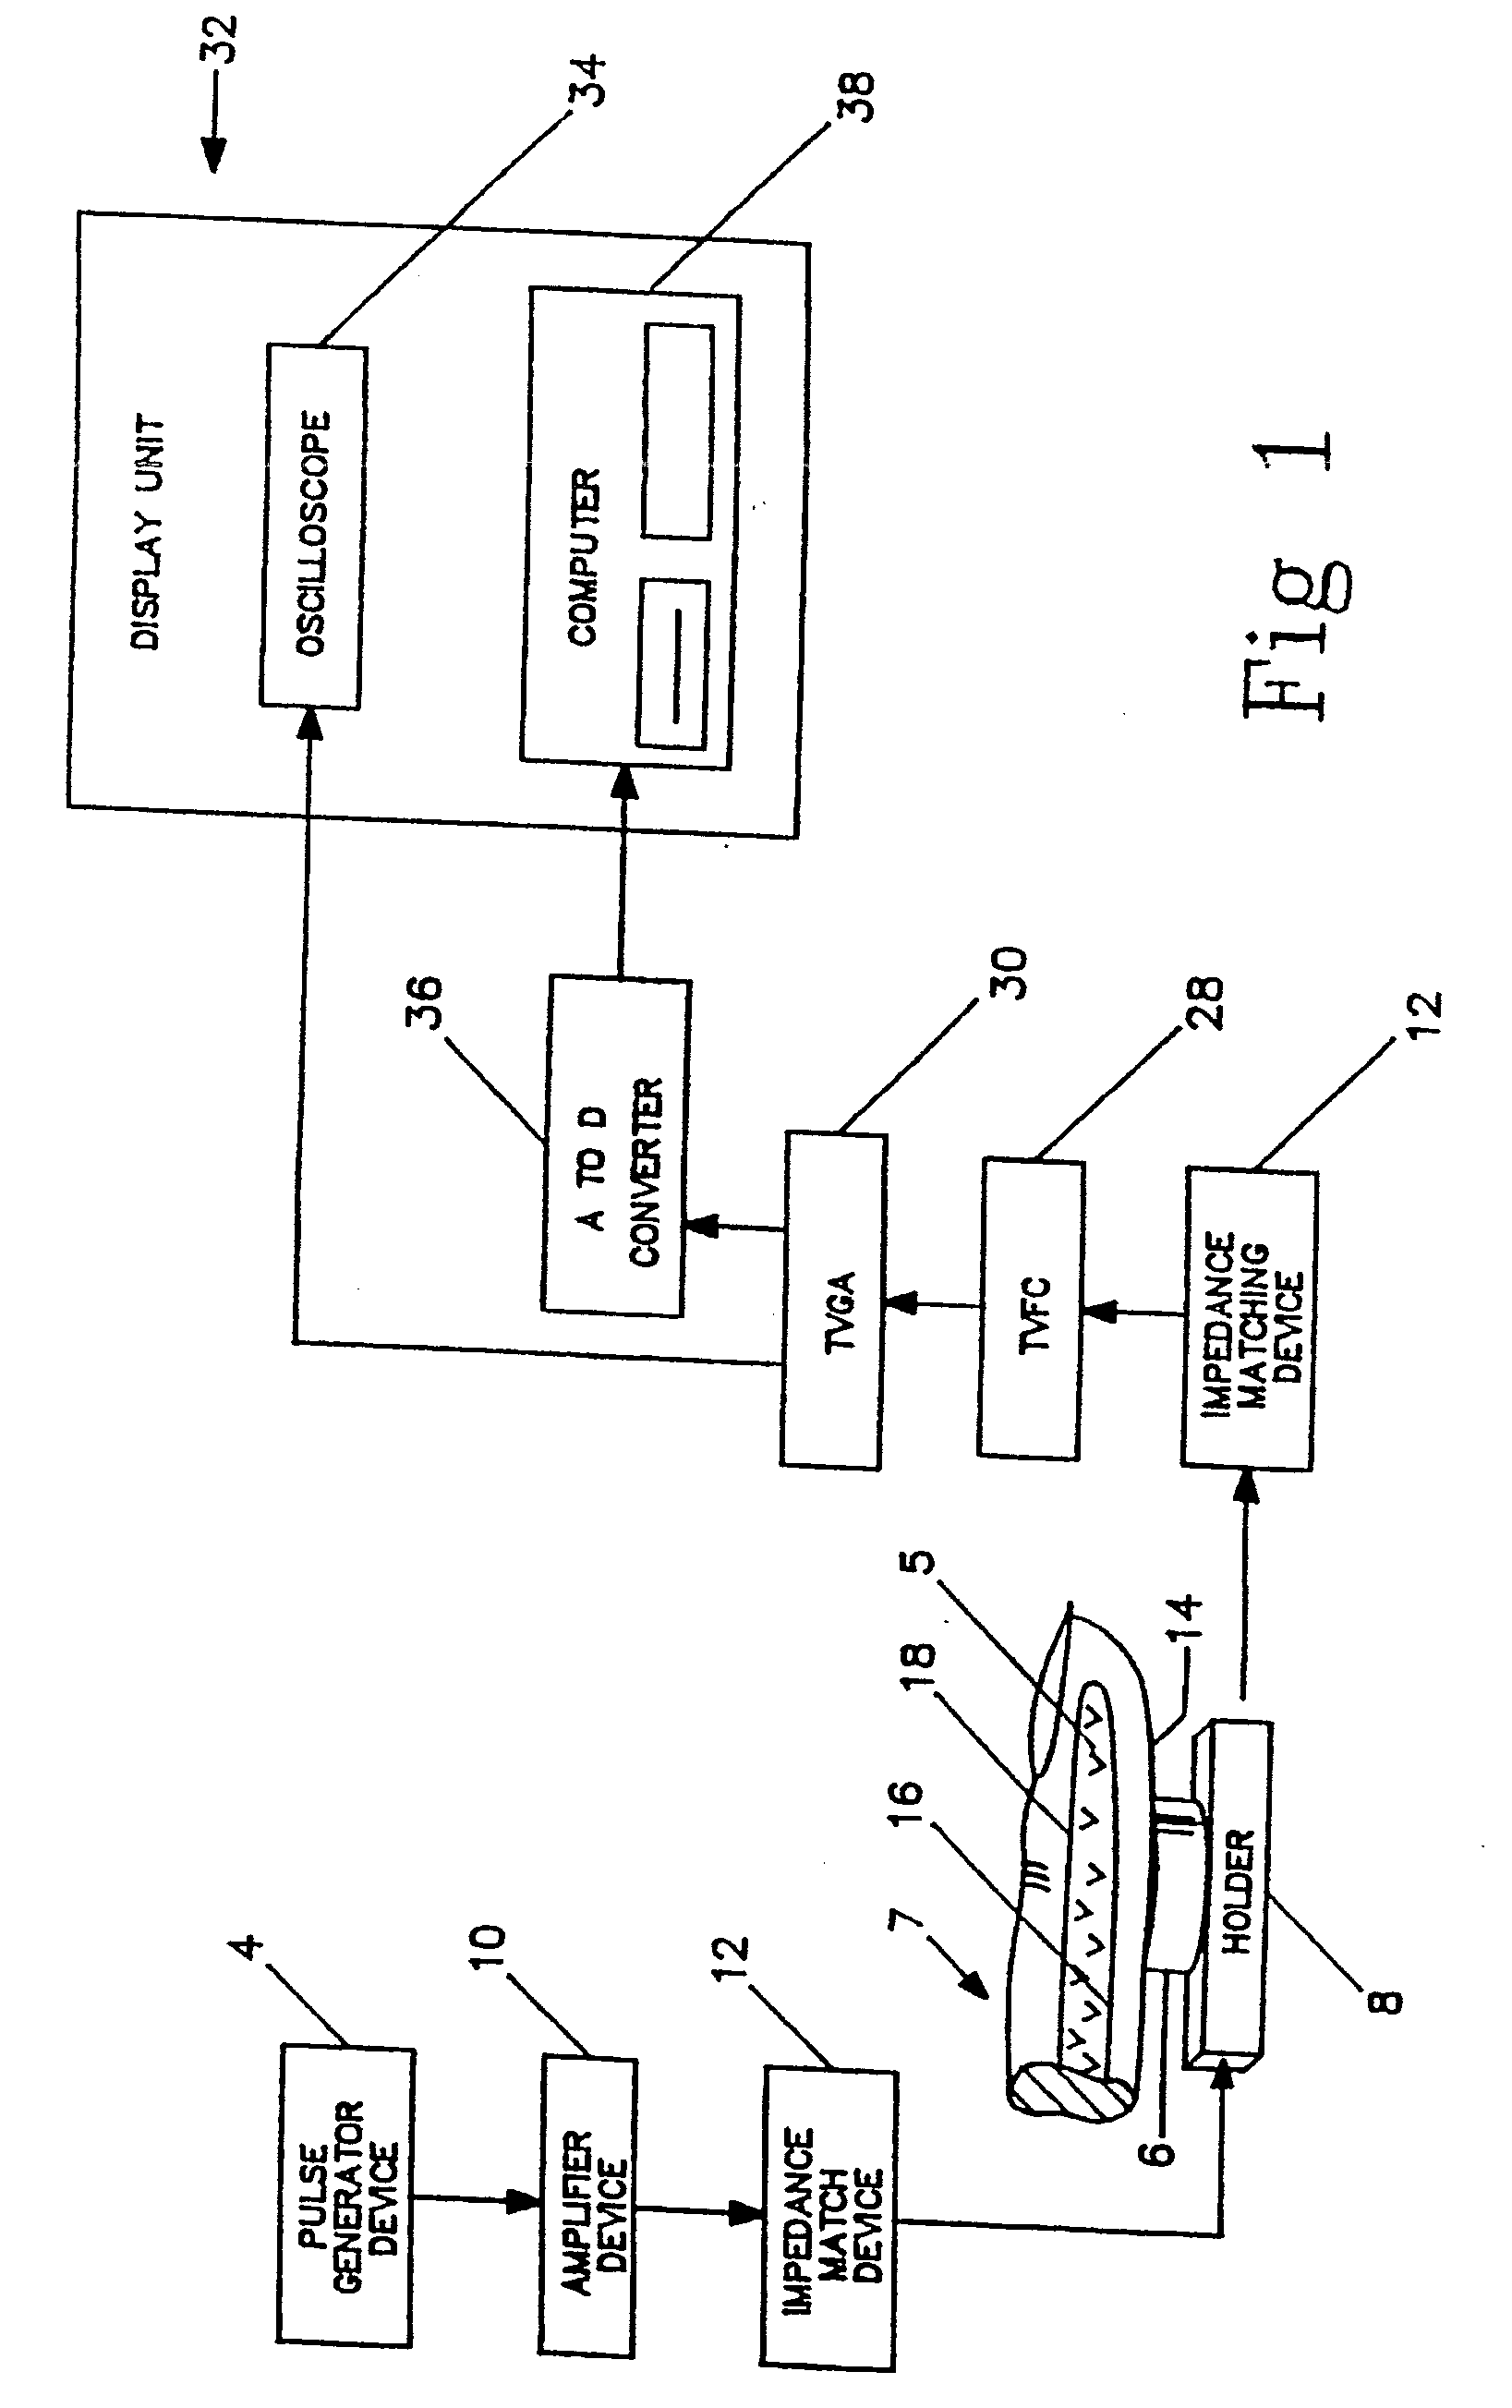 Method and system for biometric recognition using unique internal distinguishing characteristics